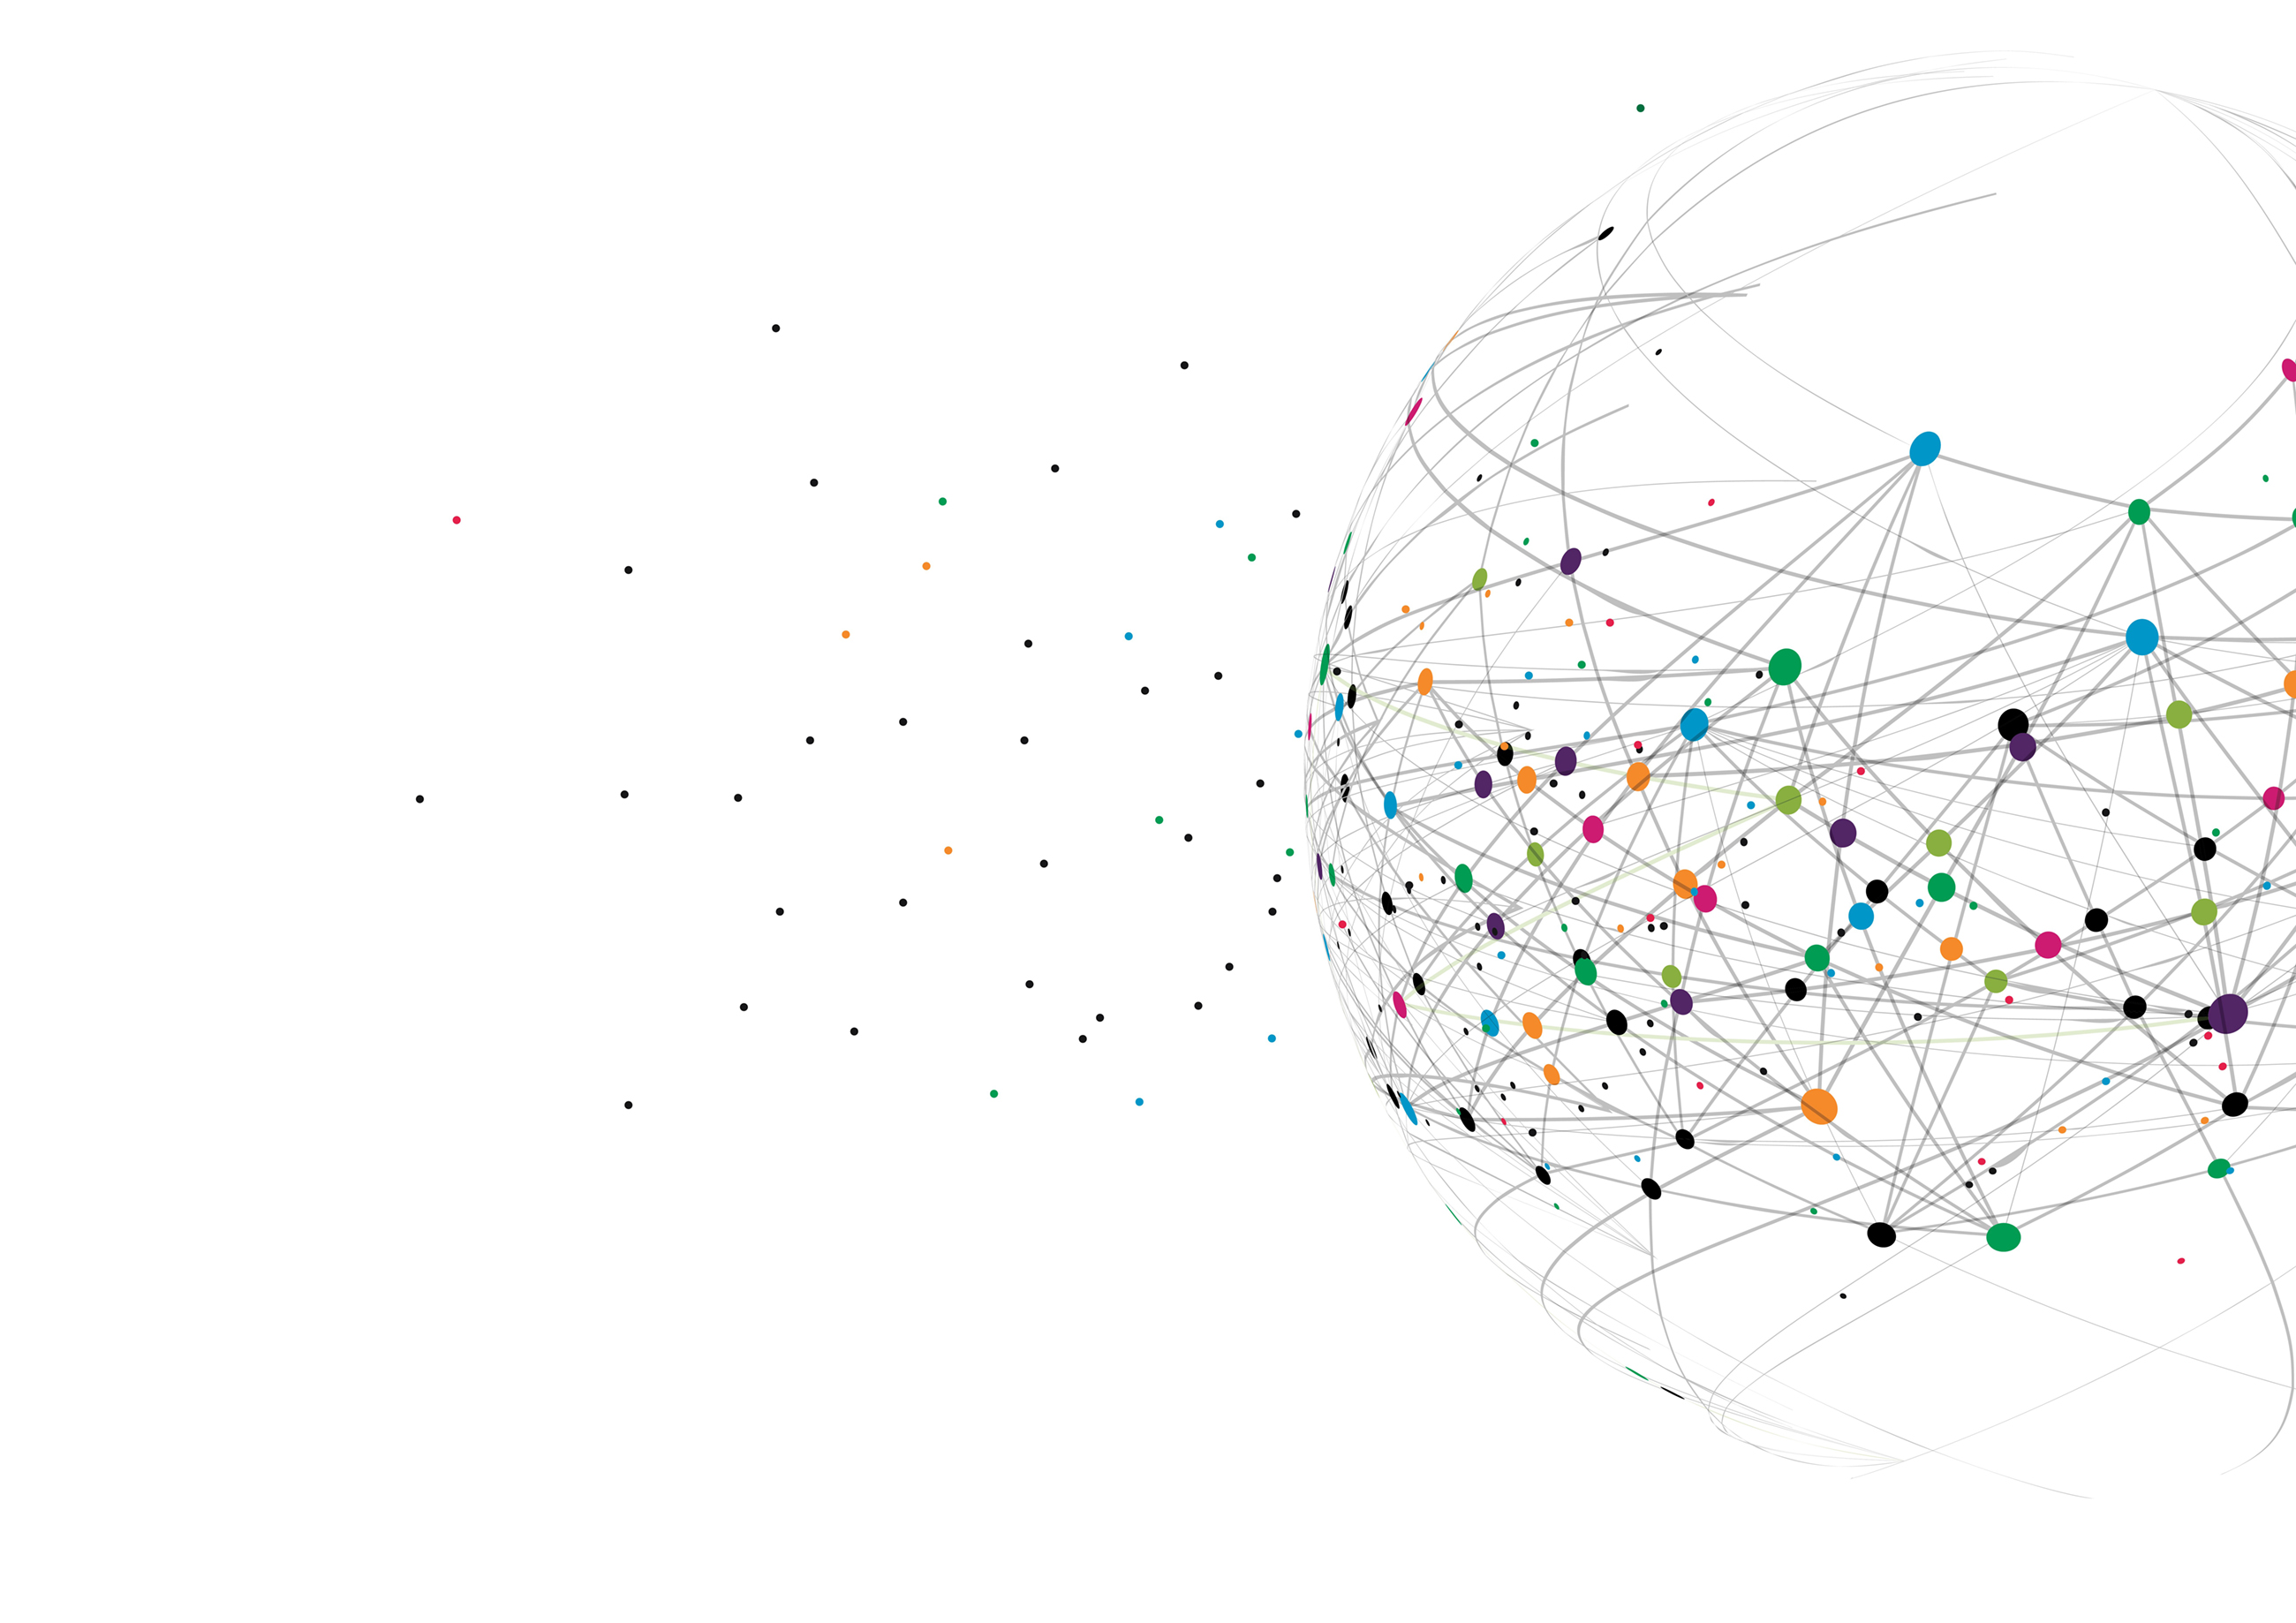 Globe network map graphic with multicolored nodes connected by fine lines